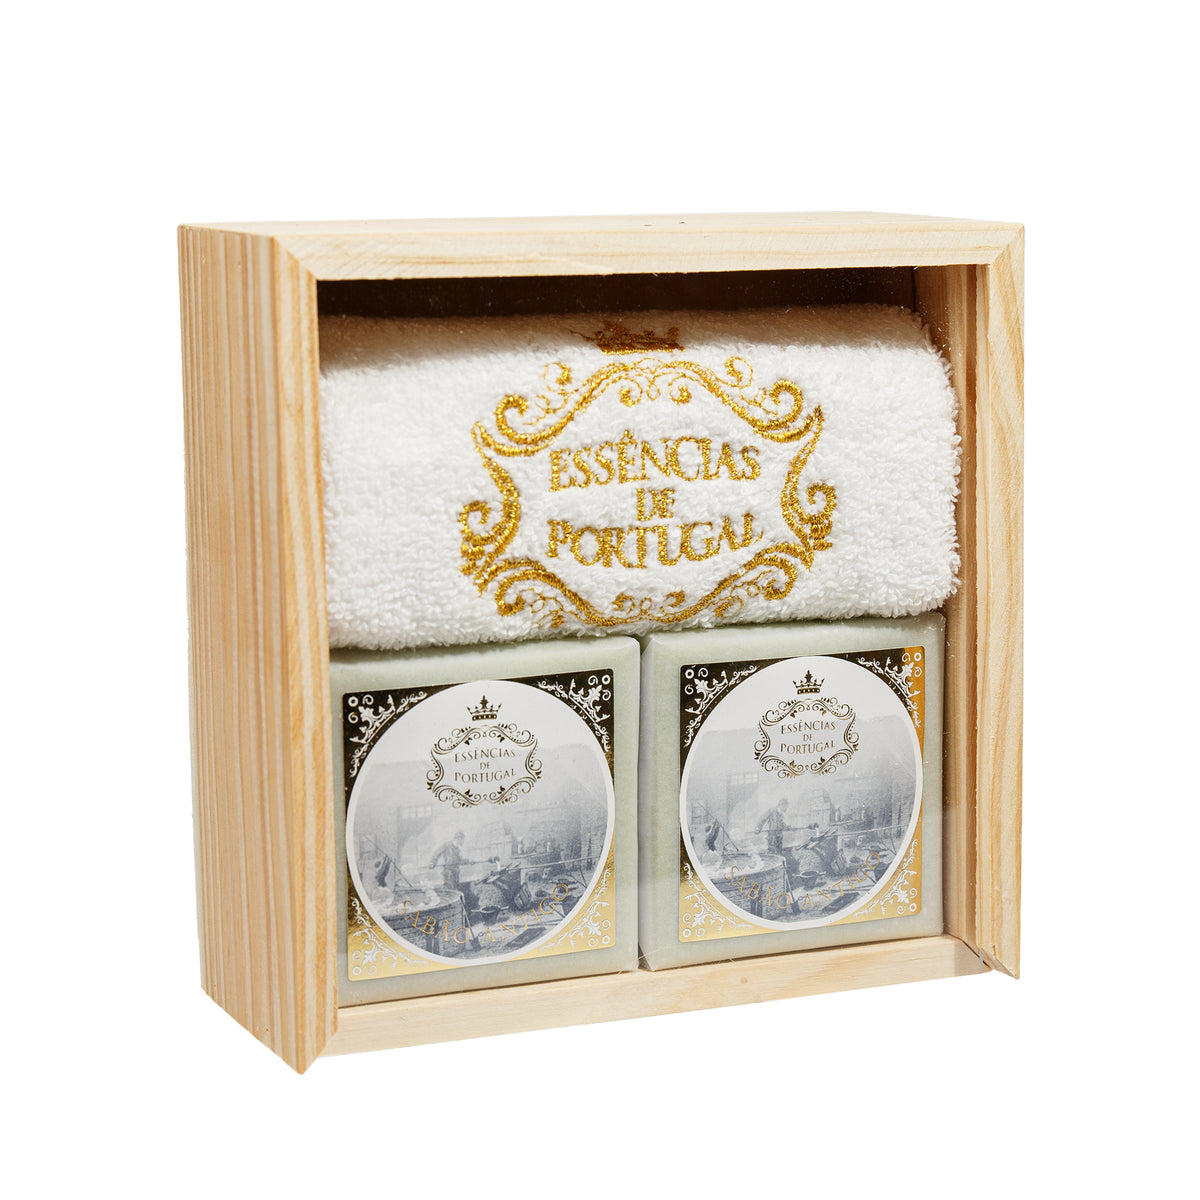 Primary Image of Soap and Towel Set